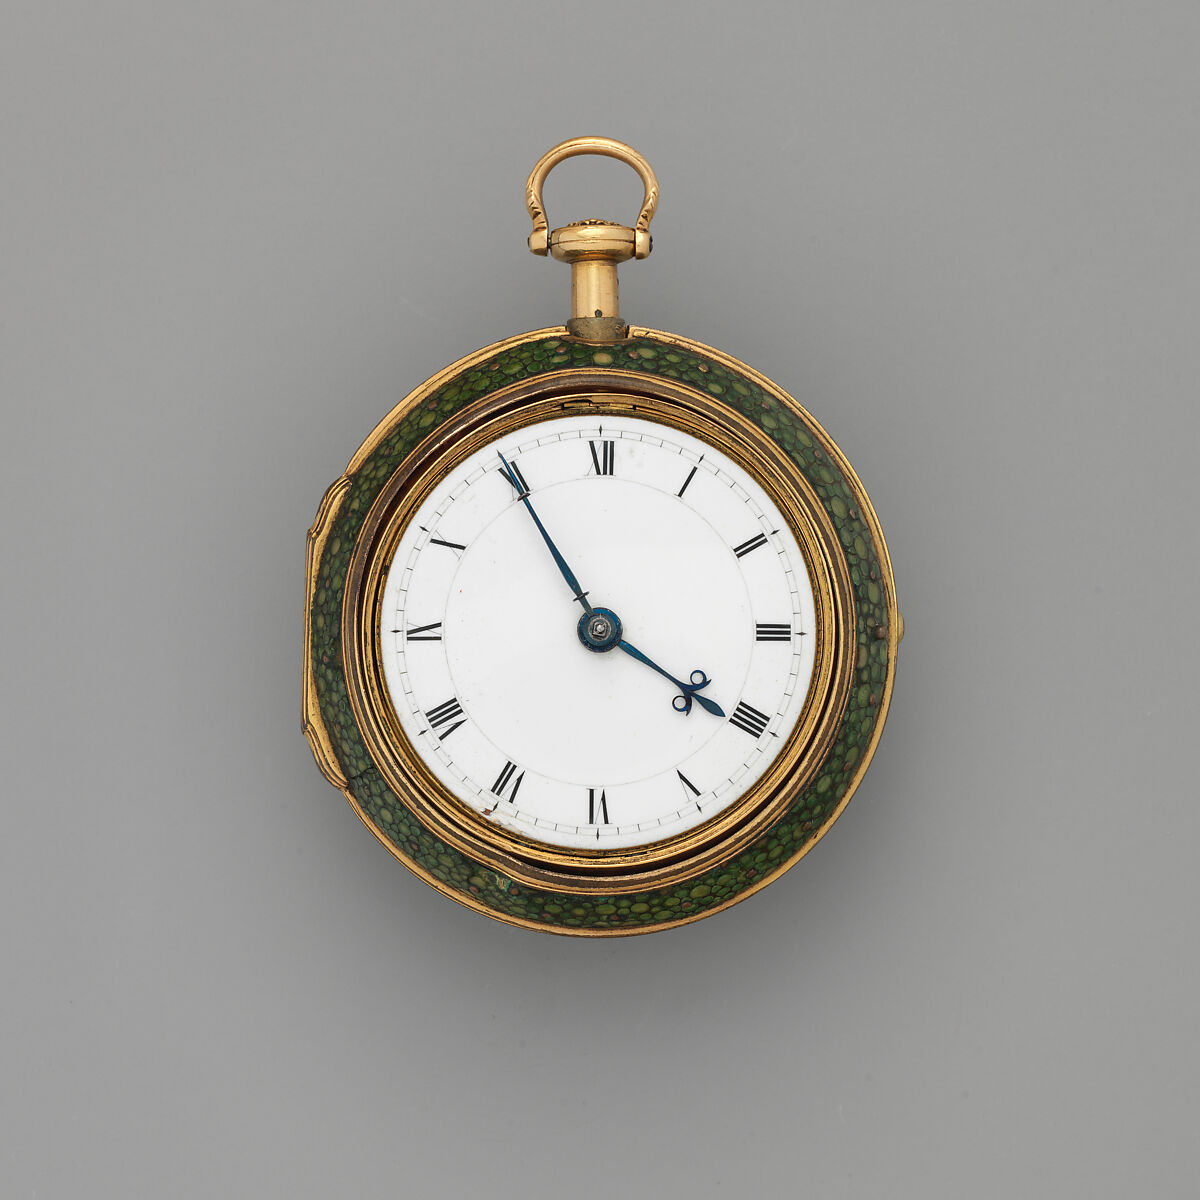 Repeater watch, Watchmaker: William Webster (British, Clockmakers&#39; Company 1710–34, died 1735), Gold, shagreen, enamel, British, London 